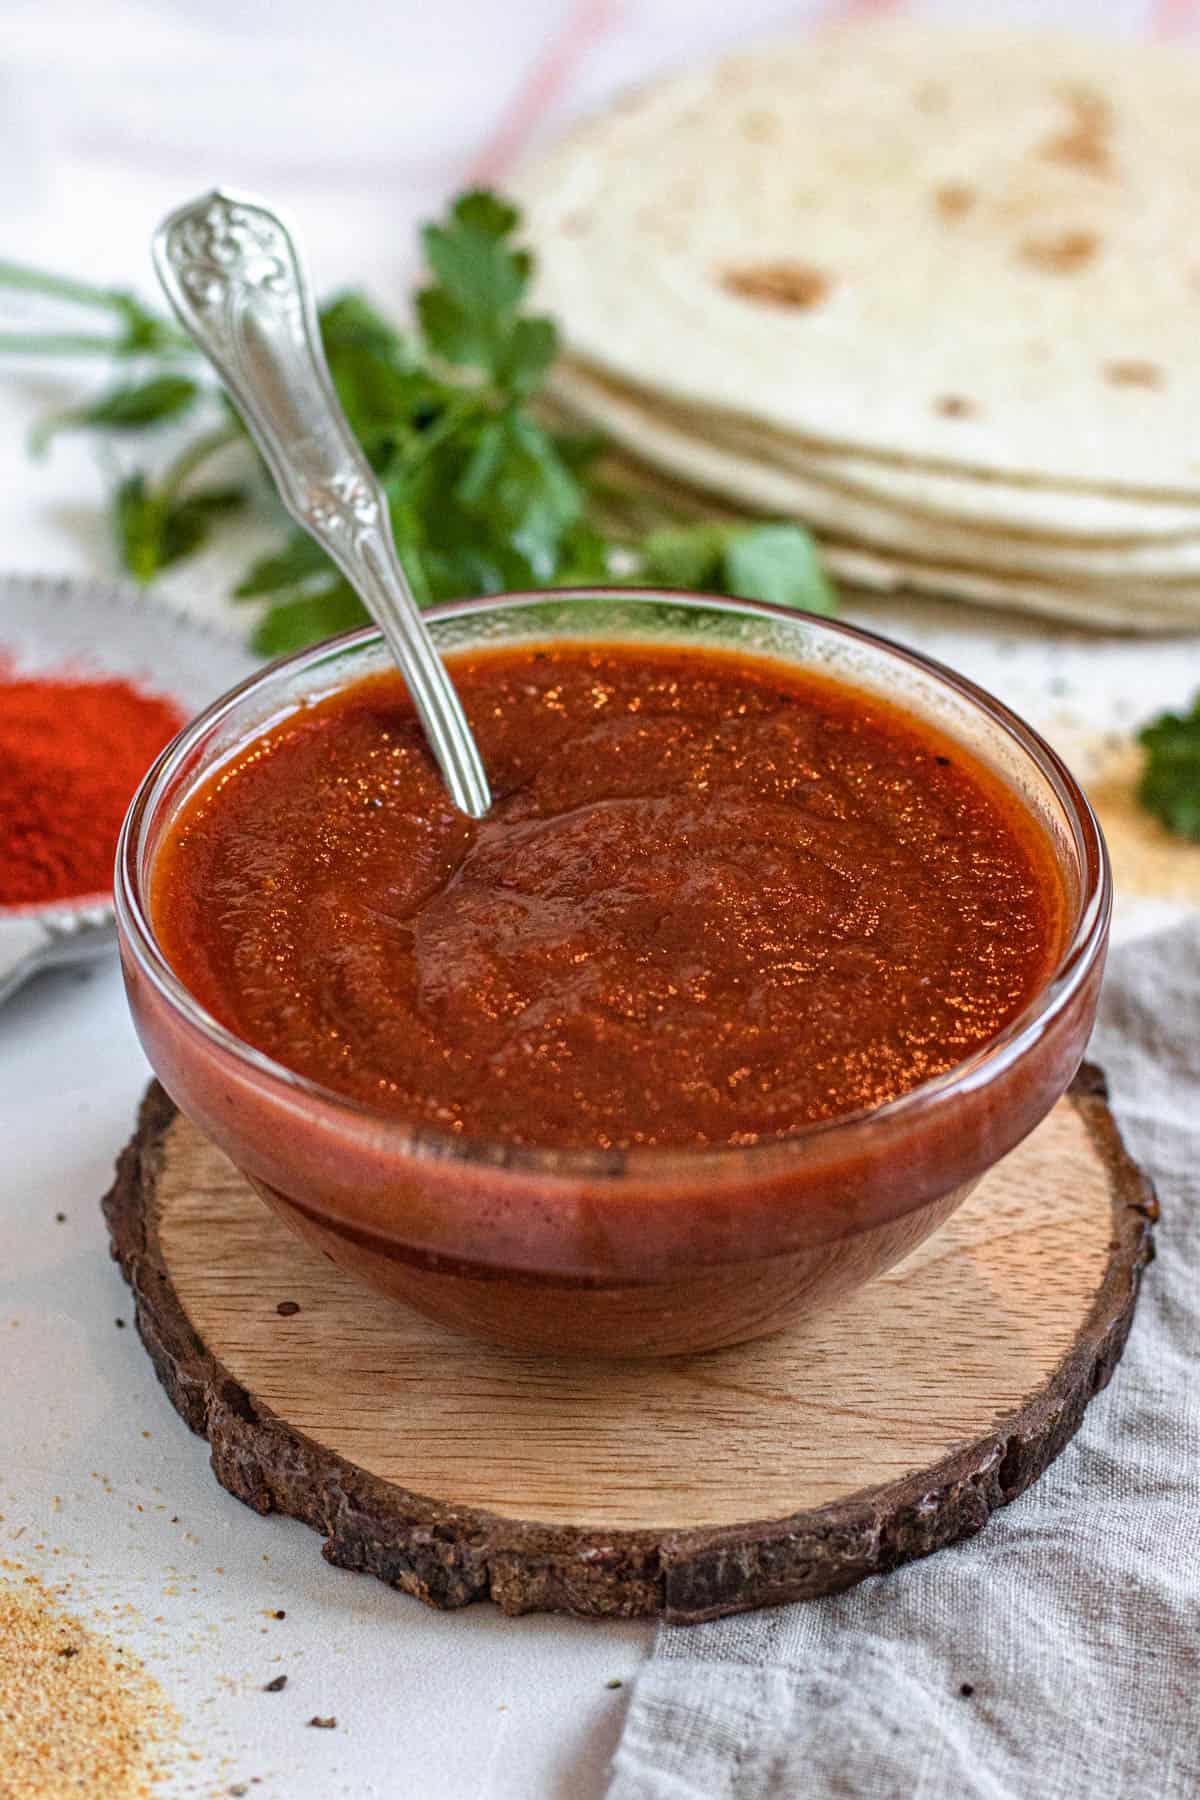 homemade chili sauce in a small glass dish with a light colored background